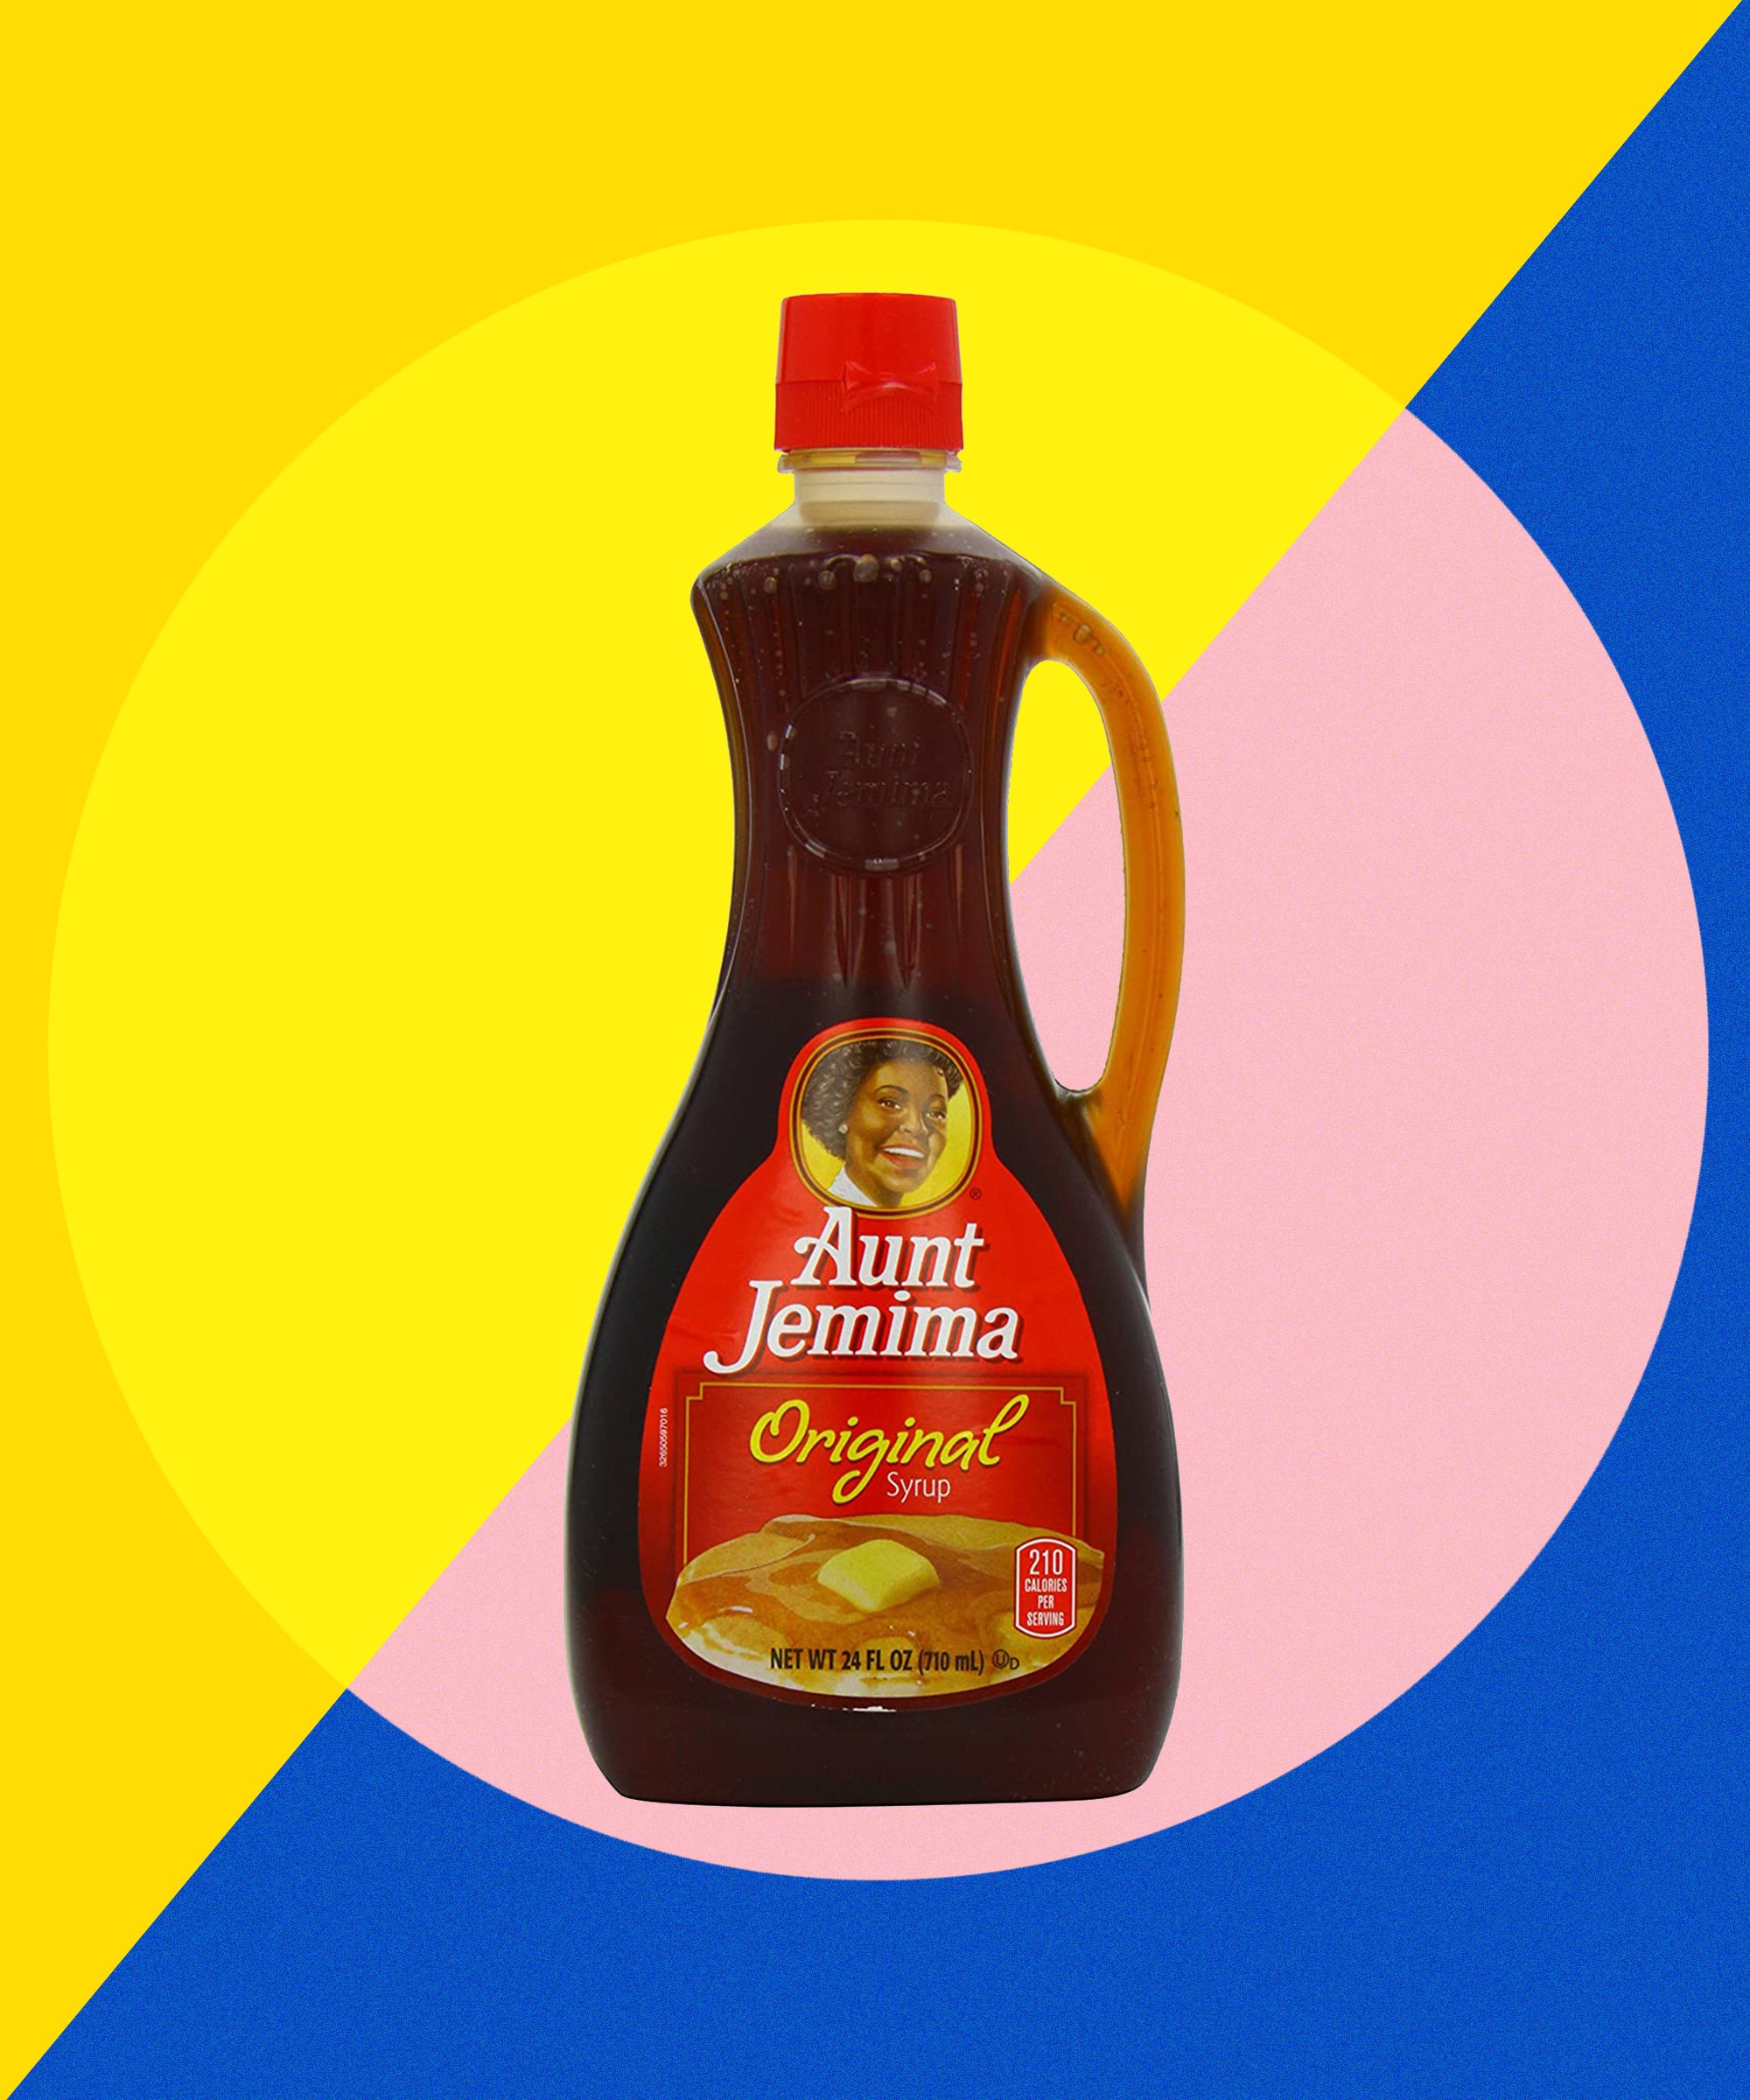 Aunt Jemima To Change Brand Name After Racist History